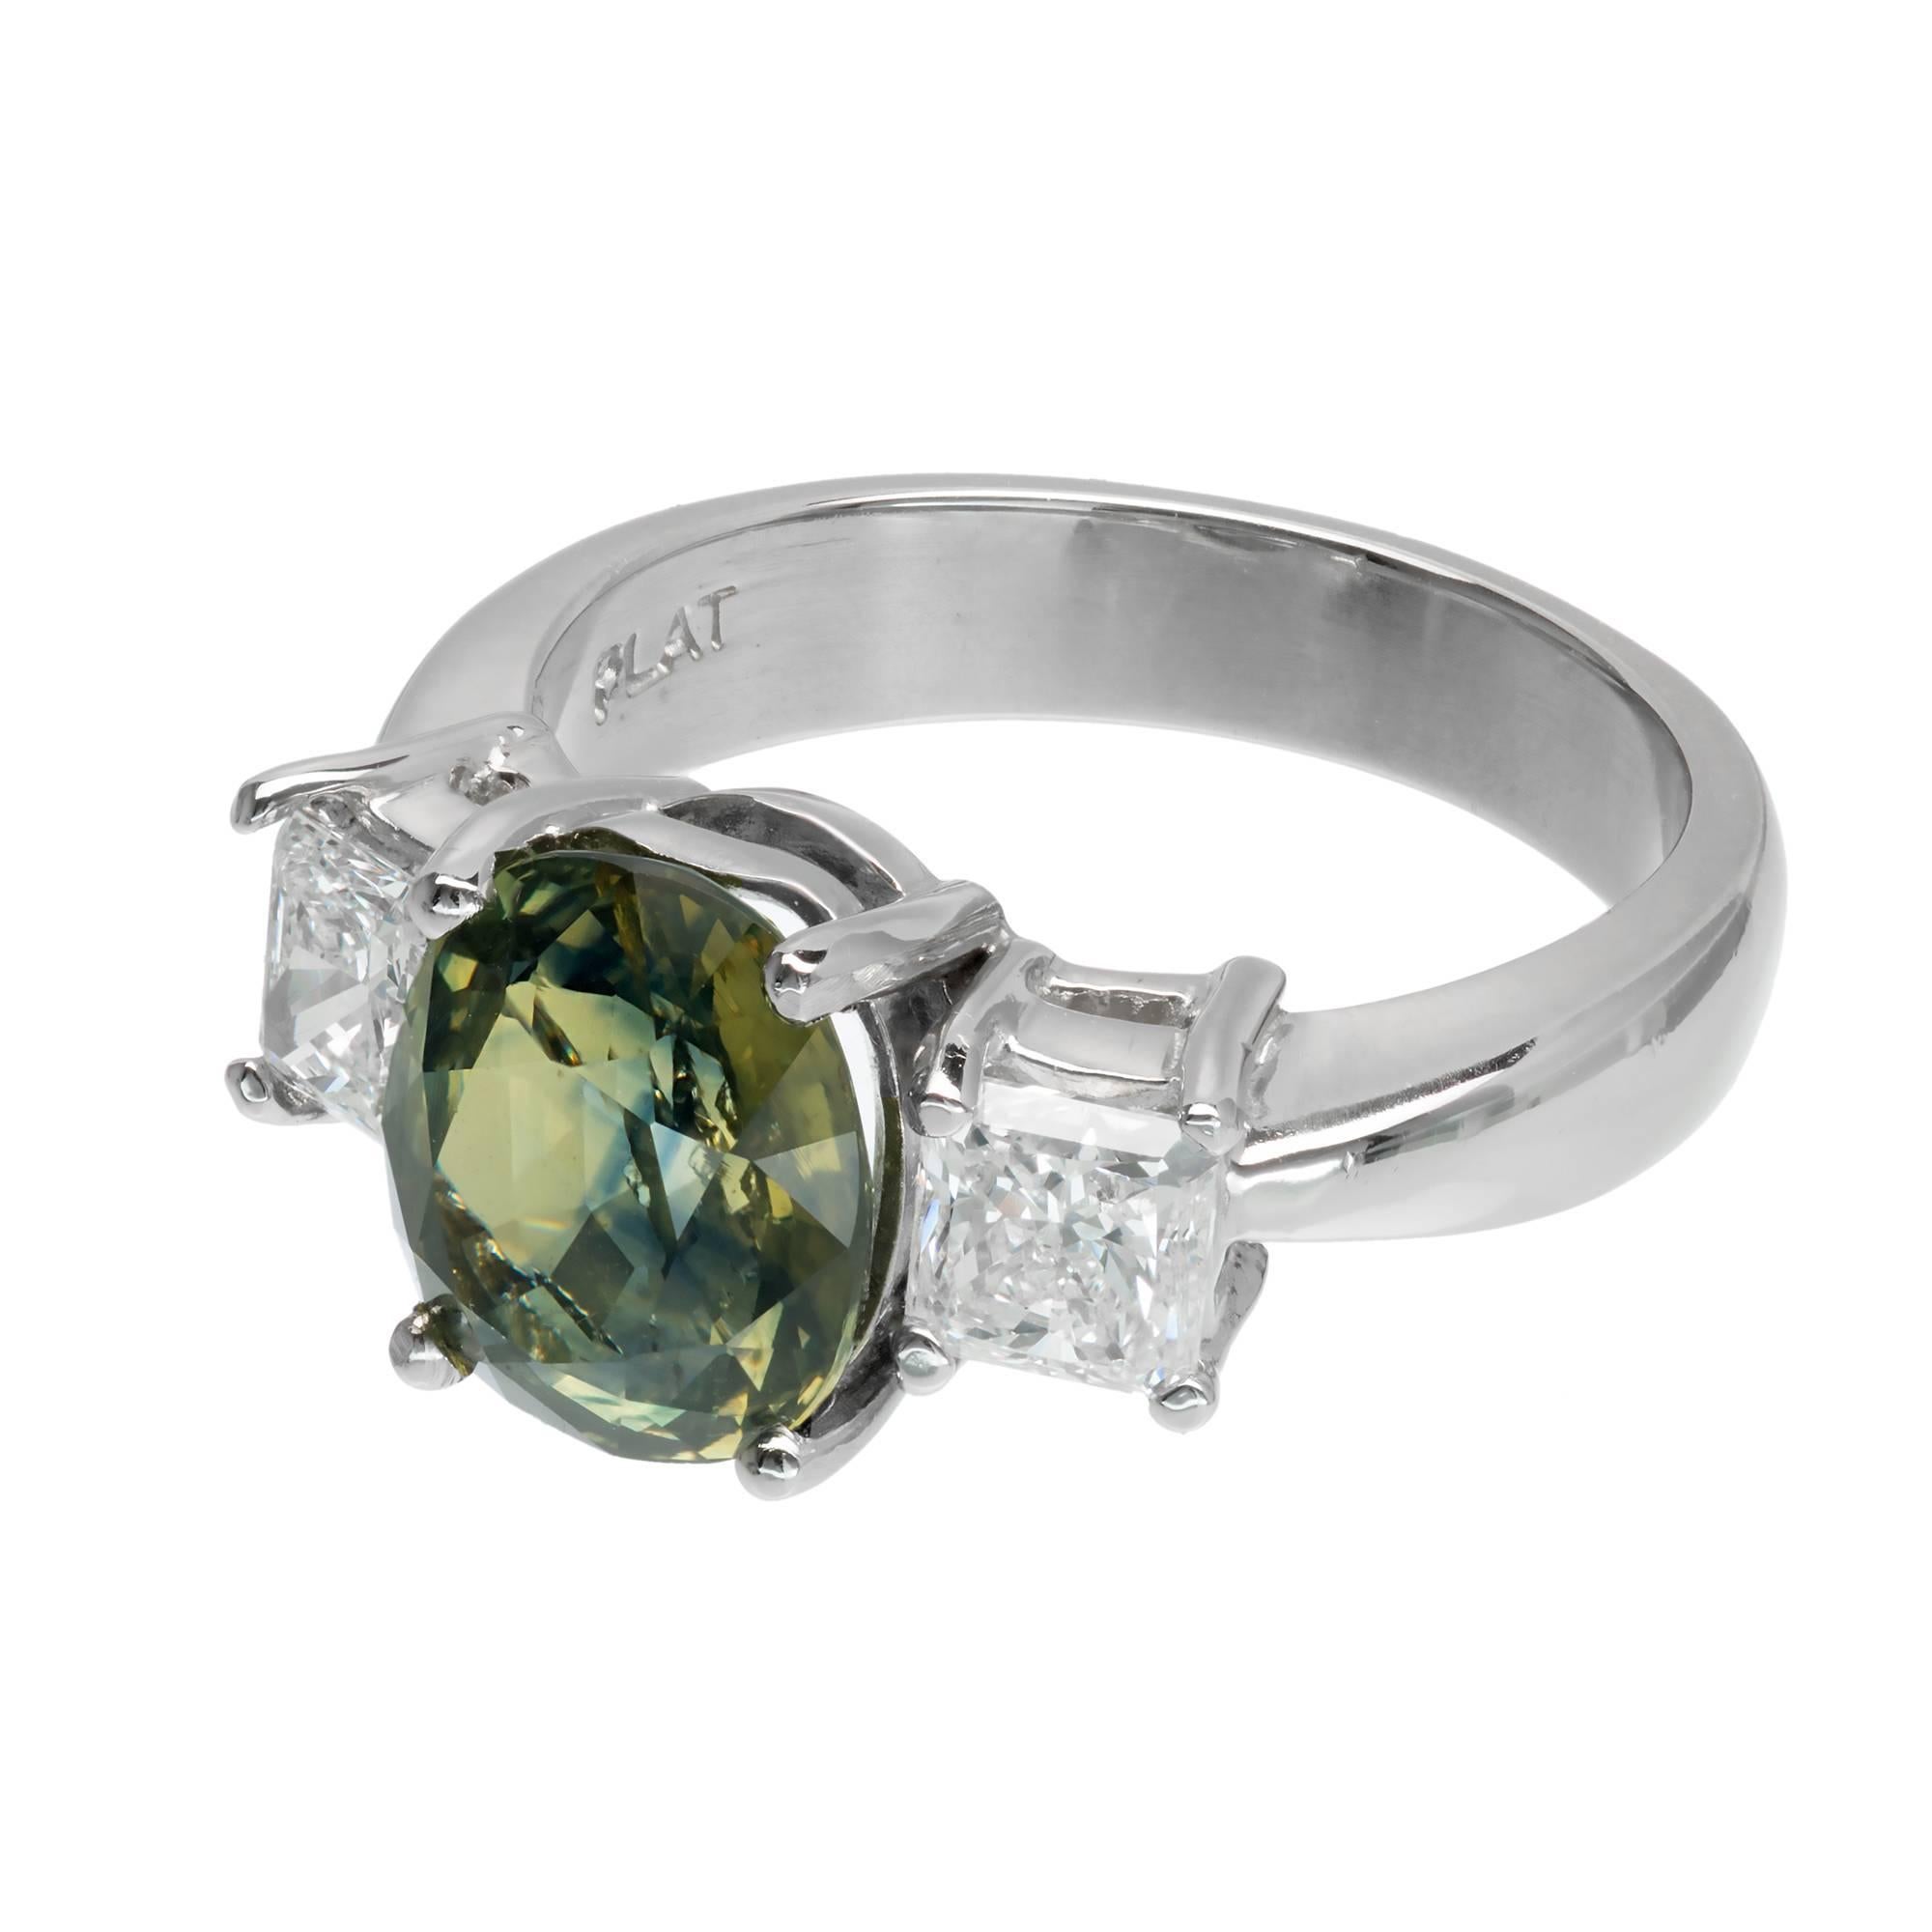  Peter Suchy sapphire and diamond engagement ring. GIA certified natural yellow green cushion cut Sapphire center stone, set in a three-stone platinum setting with 2 square radiant cut side diamonds. Created in the Peter Suchy Jewelers Workshop. 

1